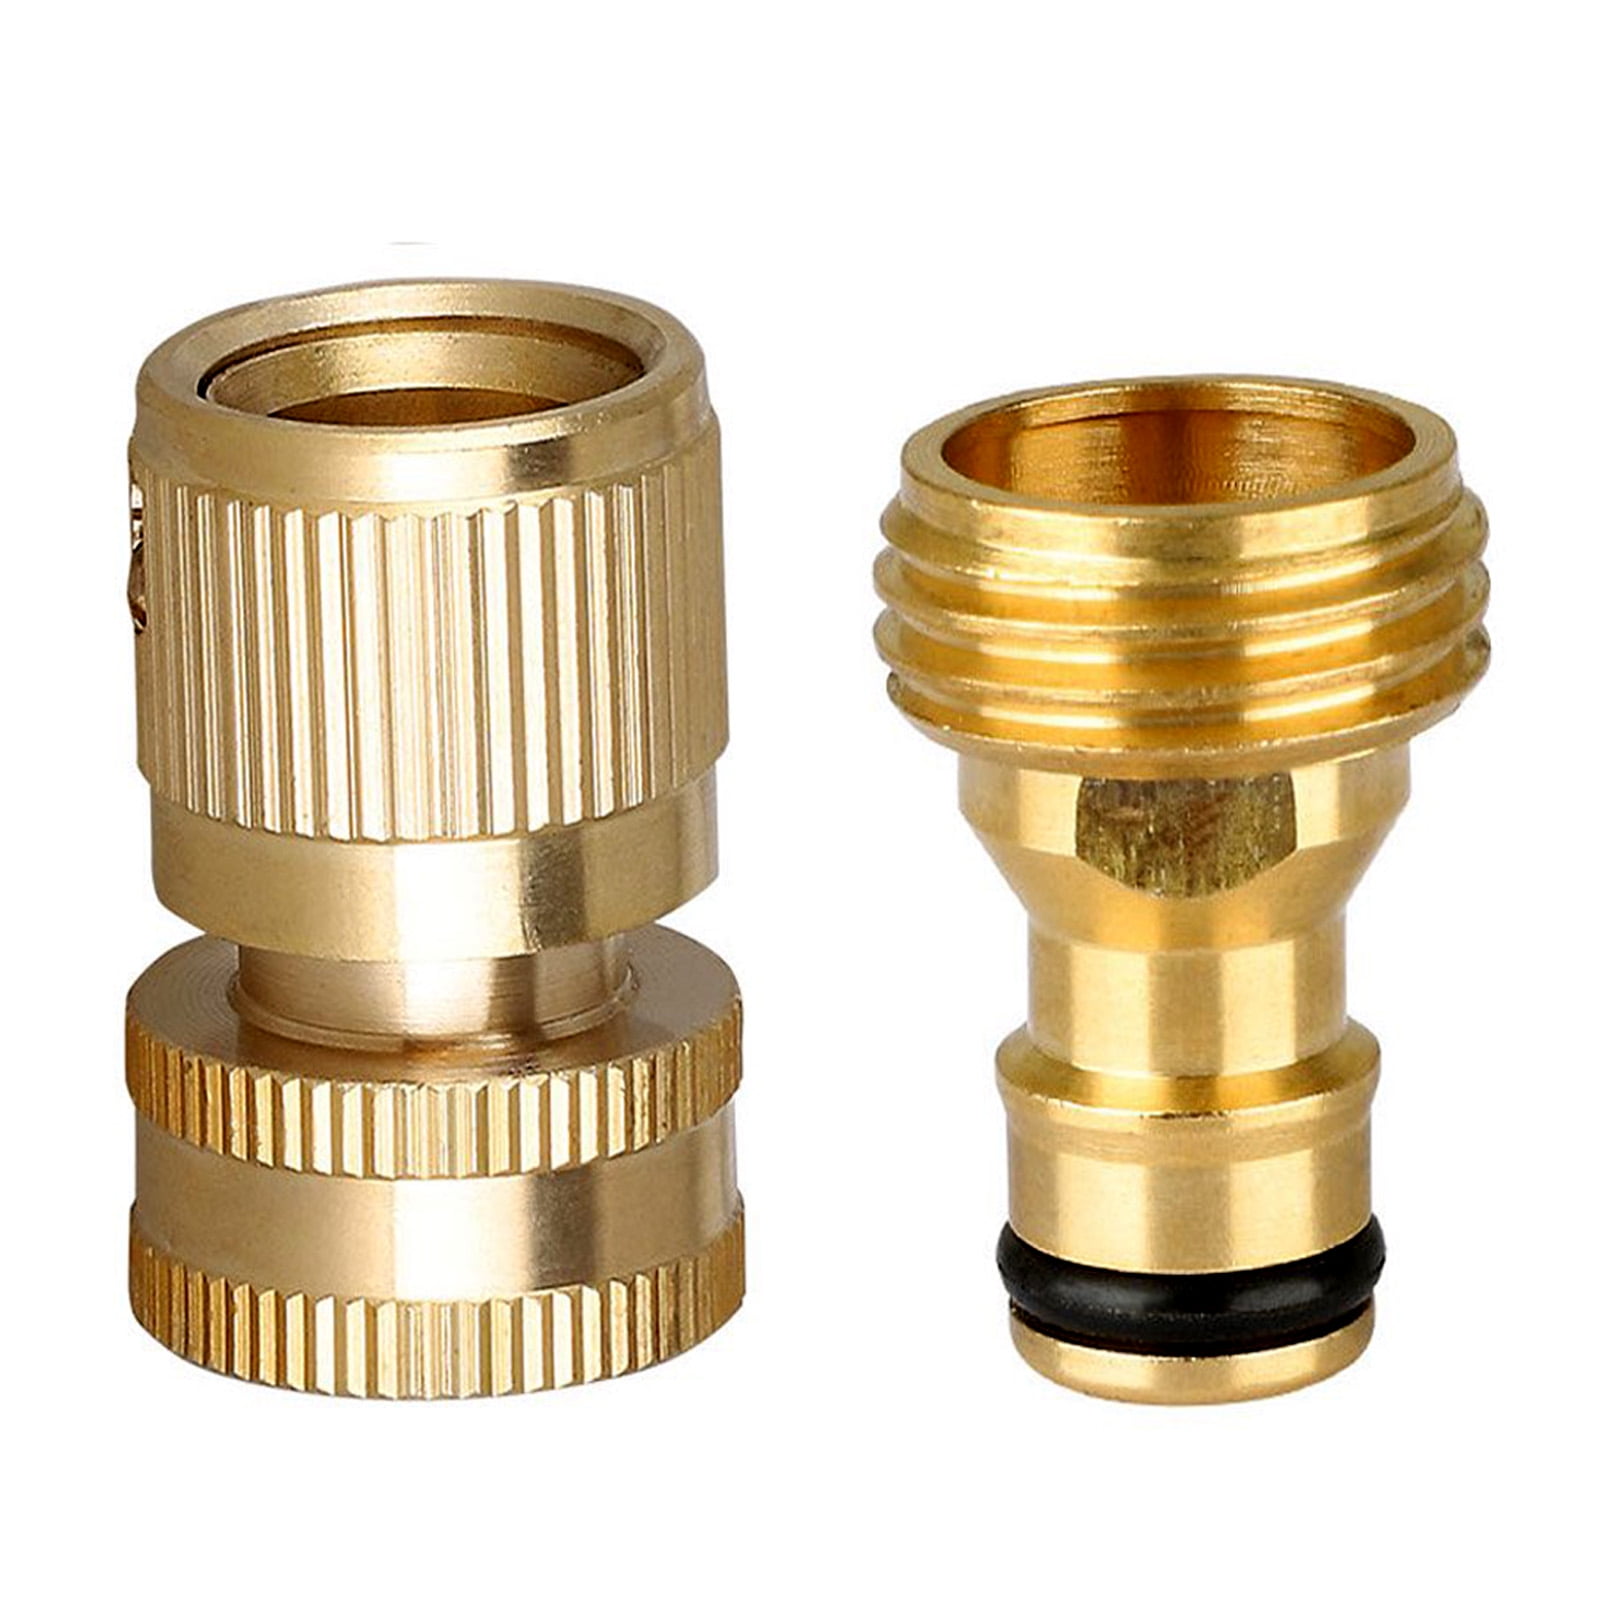 3/4" Garden Hose Pipe Tap Connector Fittings Brass Water Quick Adaptor 1 Set 